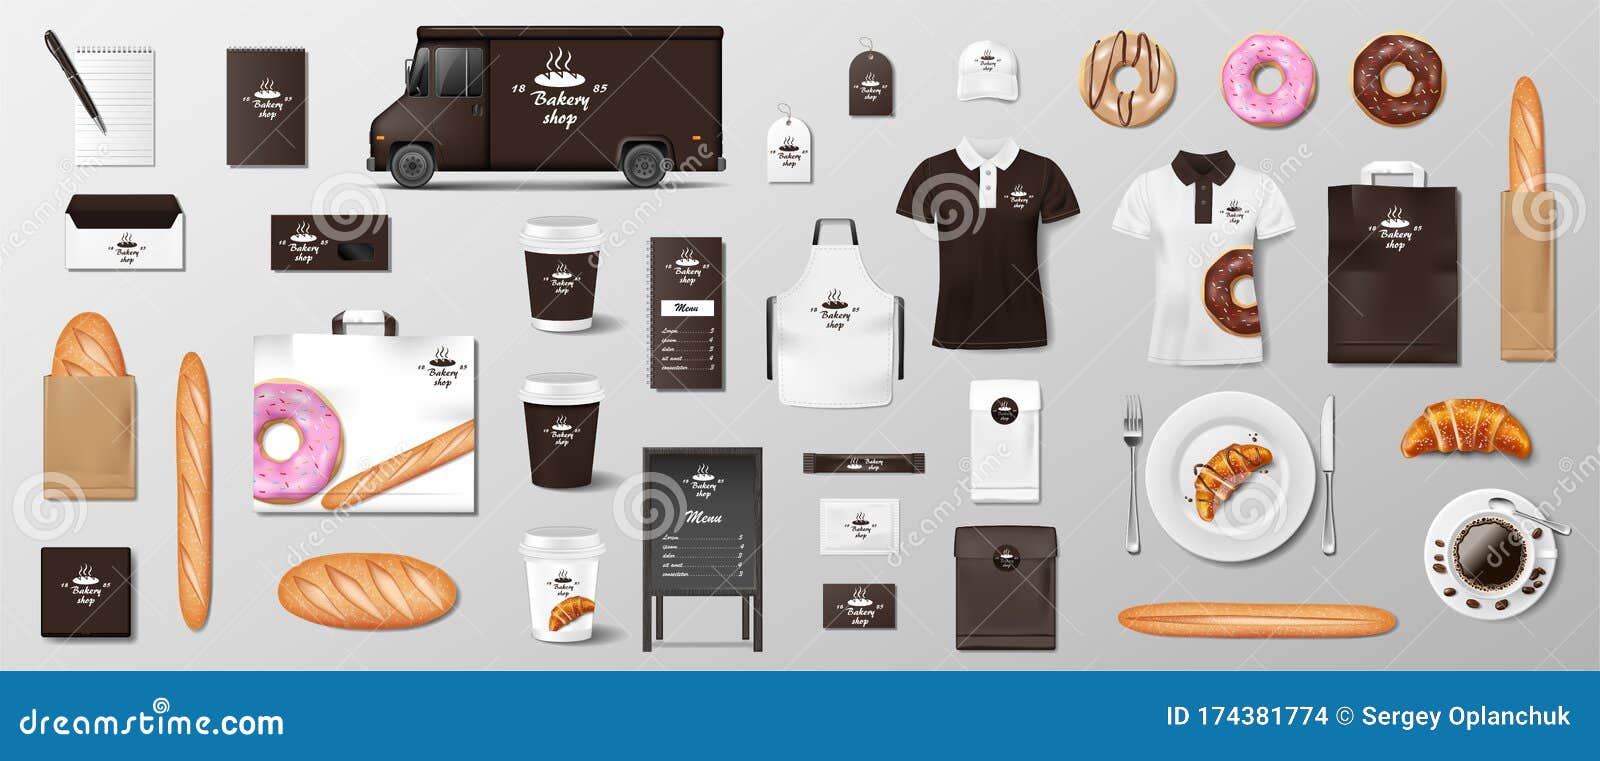 Download Mockup Set For Bakery Shop Cafe Restaurant Brand Identity Realistic Bakery Package Mockup Cup Pack Uniform Shirt Stock Vector Illustration Of Apron Logotype 174381774